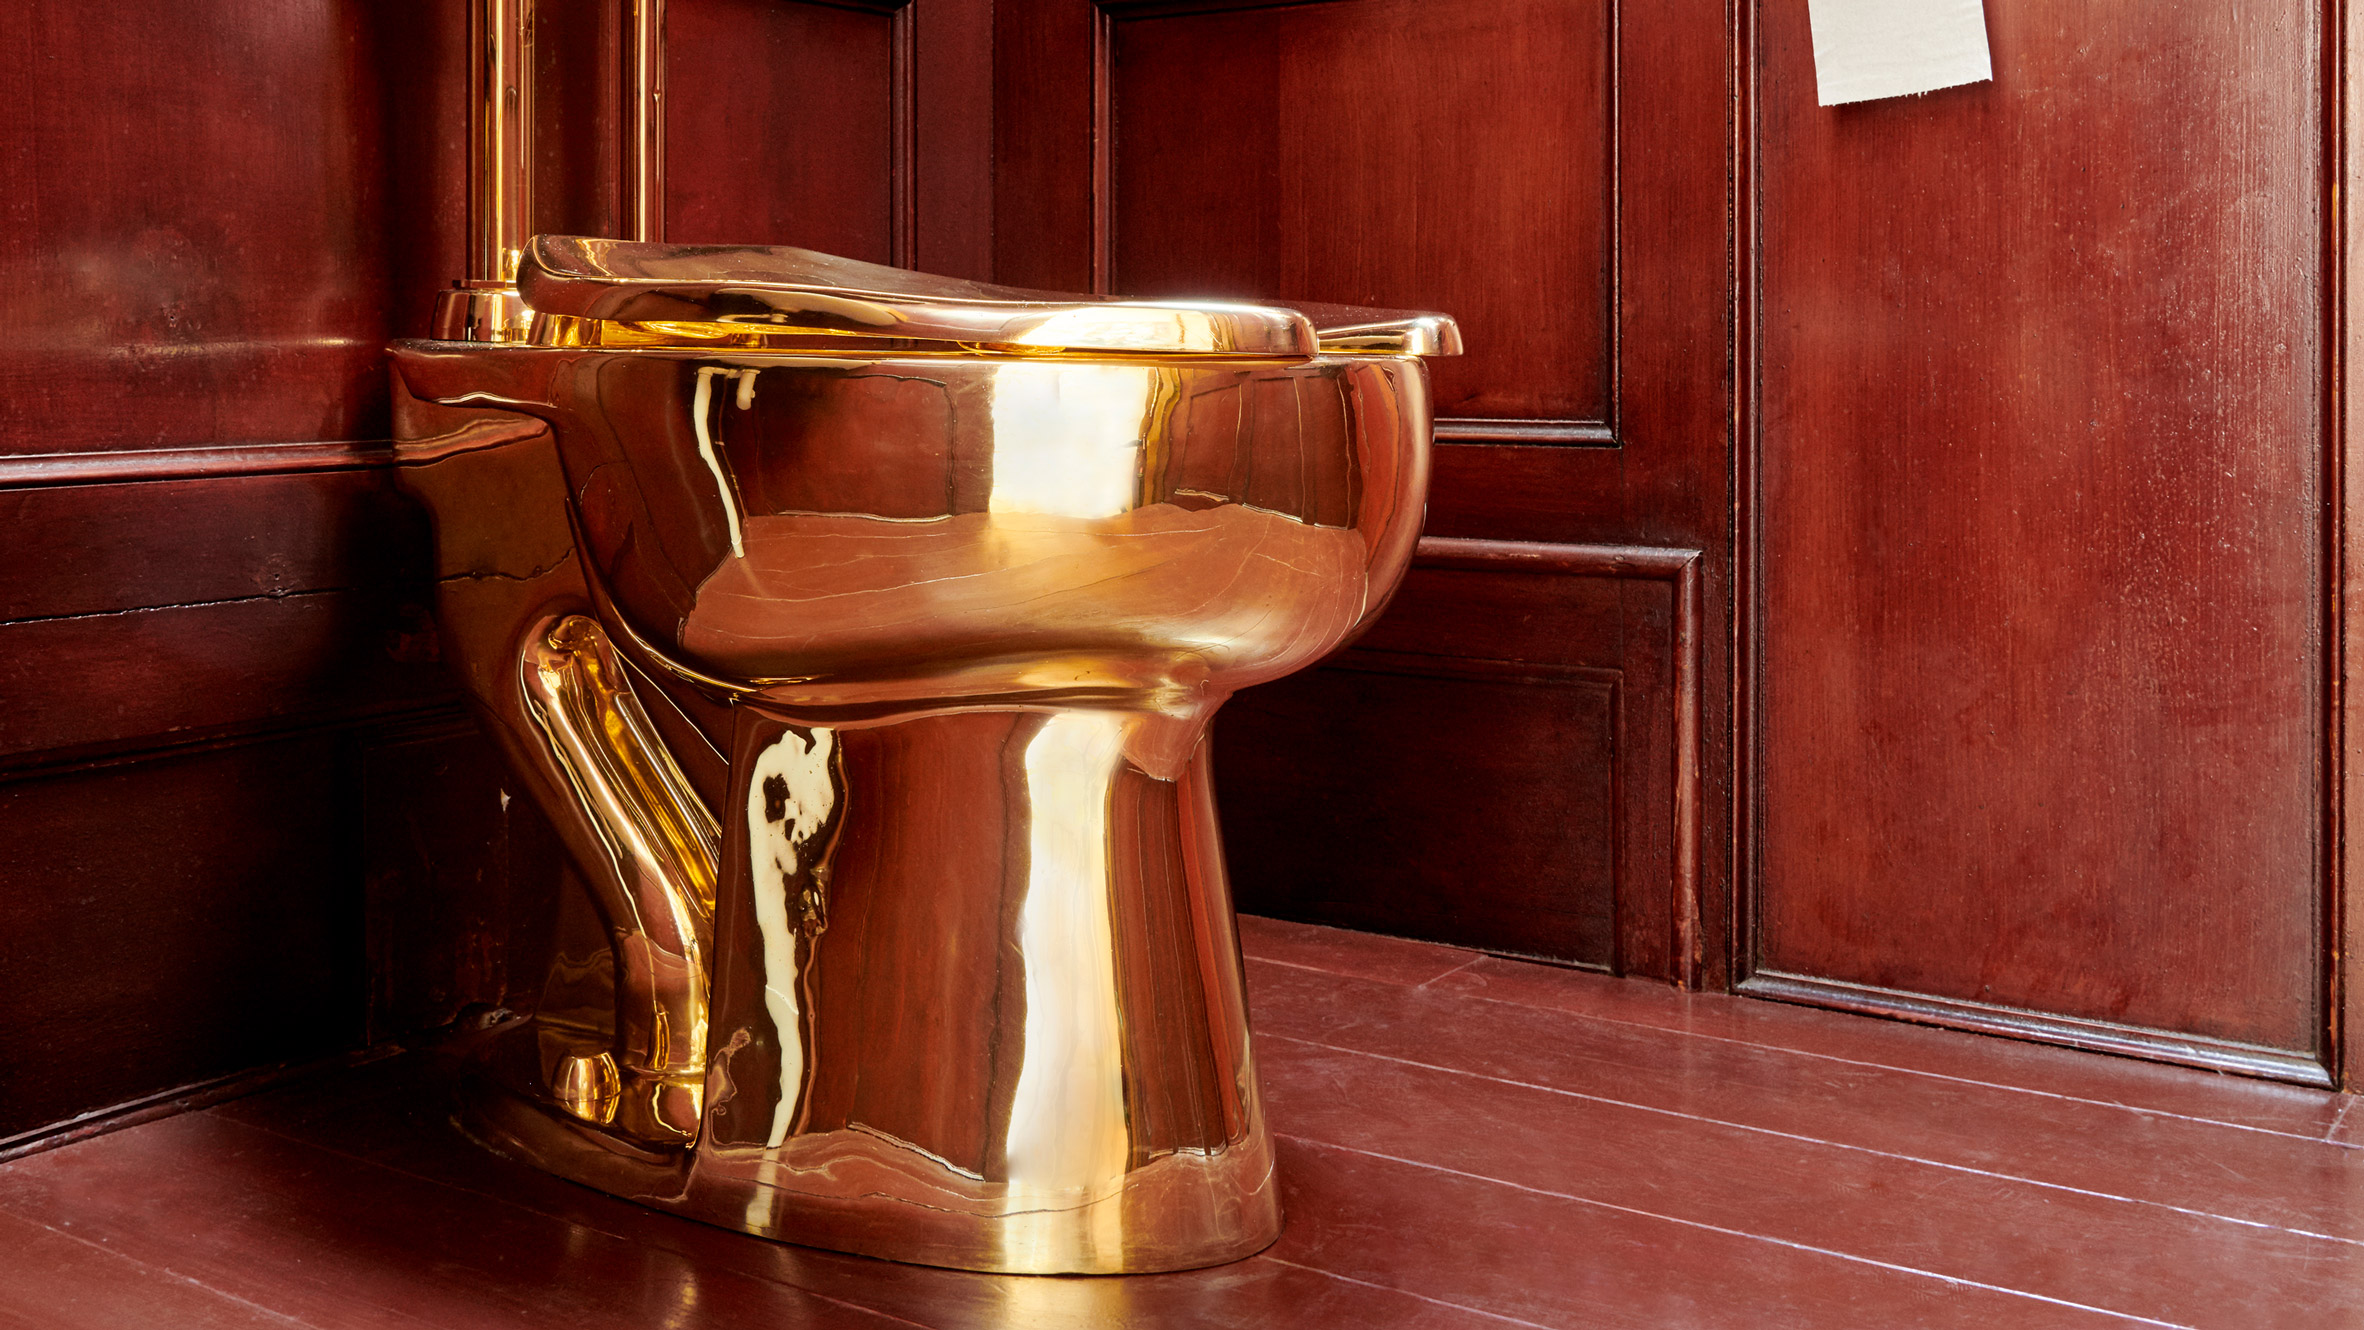 Which Is The Best Place To Buy Toilet Gold?